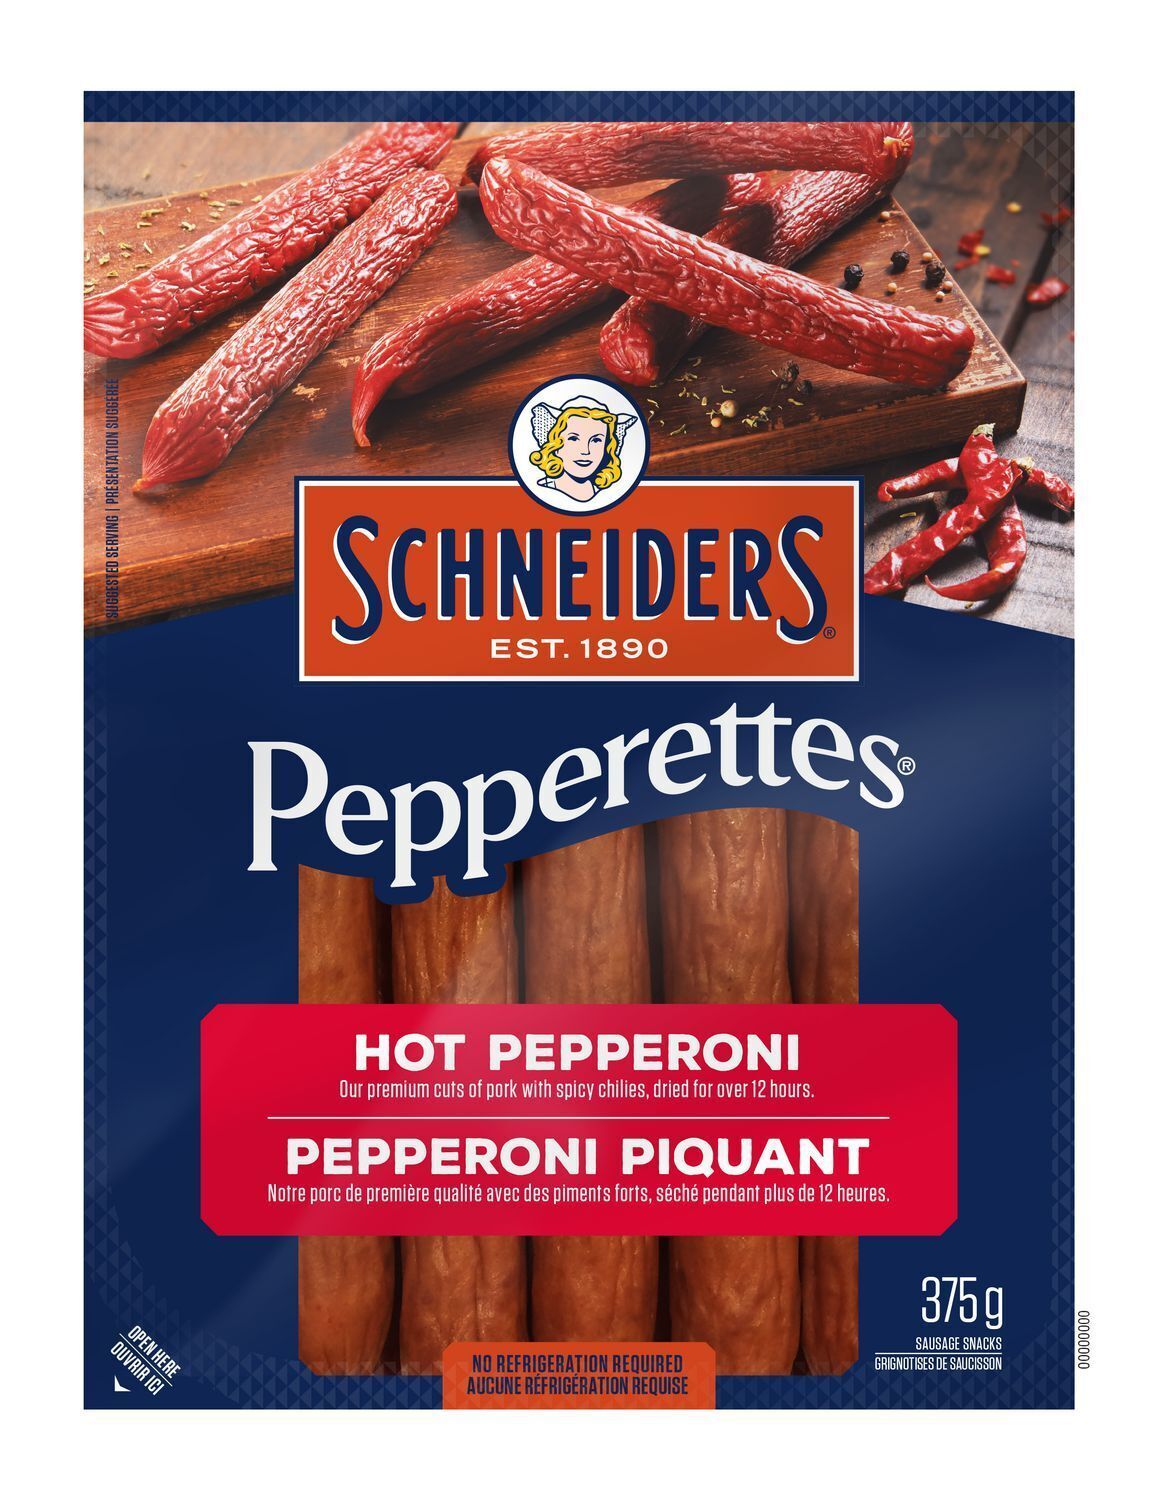 Primary image for Schneiders Pepperettes Sausage Sticks Hot Pepperoni Flavor 375g -Free Shipping